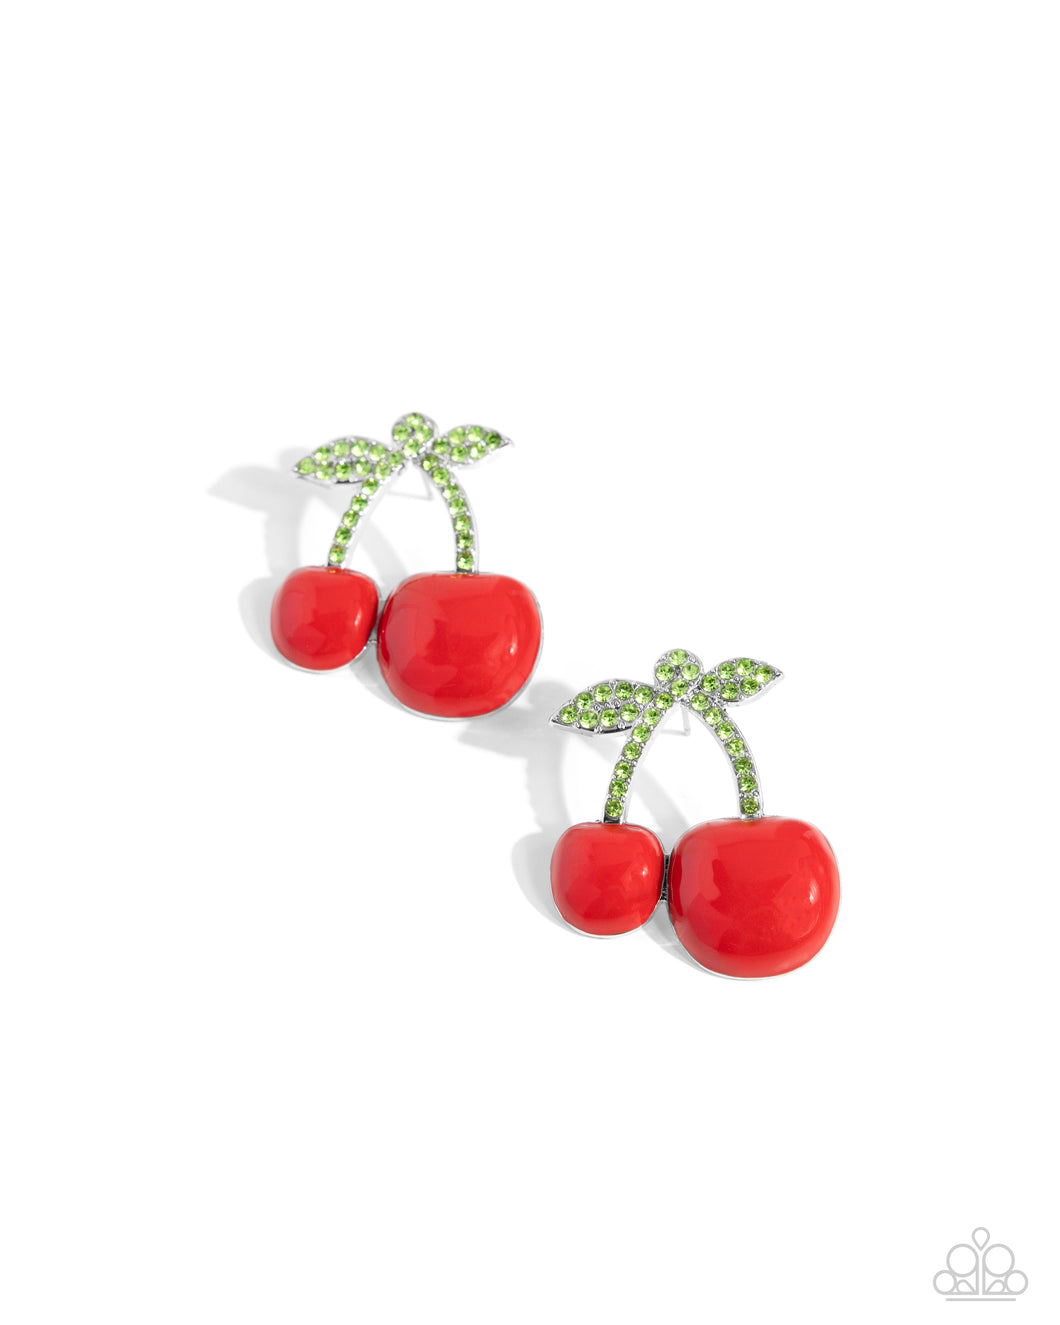 oak-sisters-jewelry-charming-cherries-red-paparazzi-accessories-by-lisa